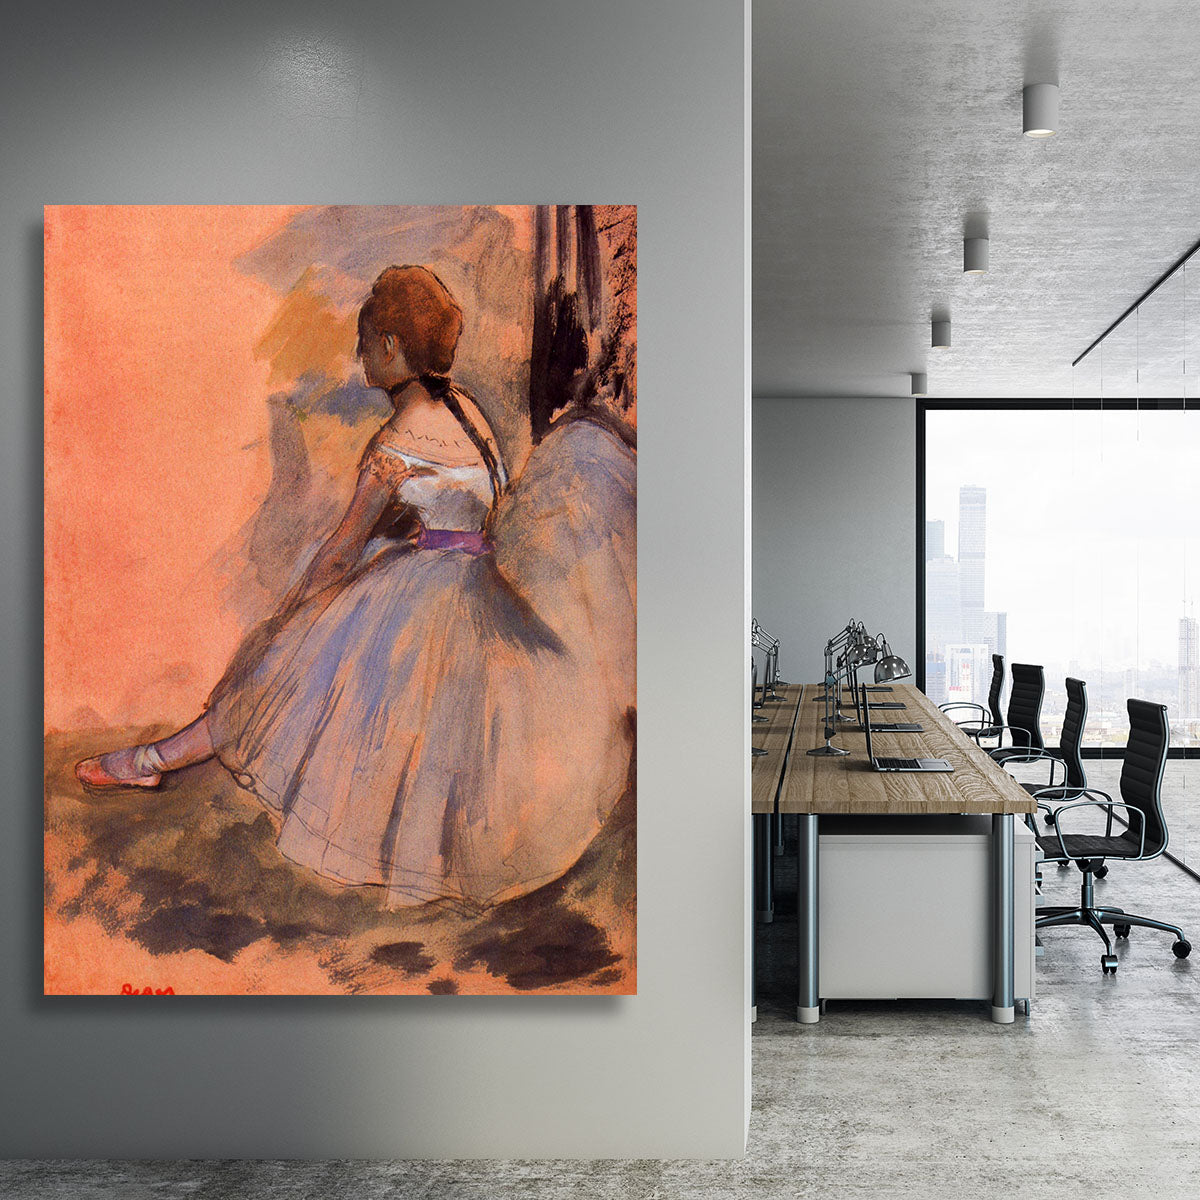 Sitting dancer with extended left leg by Degas Canvas Print or Poster - Canvas Art Rocks - 3